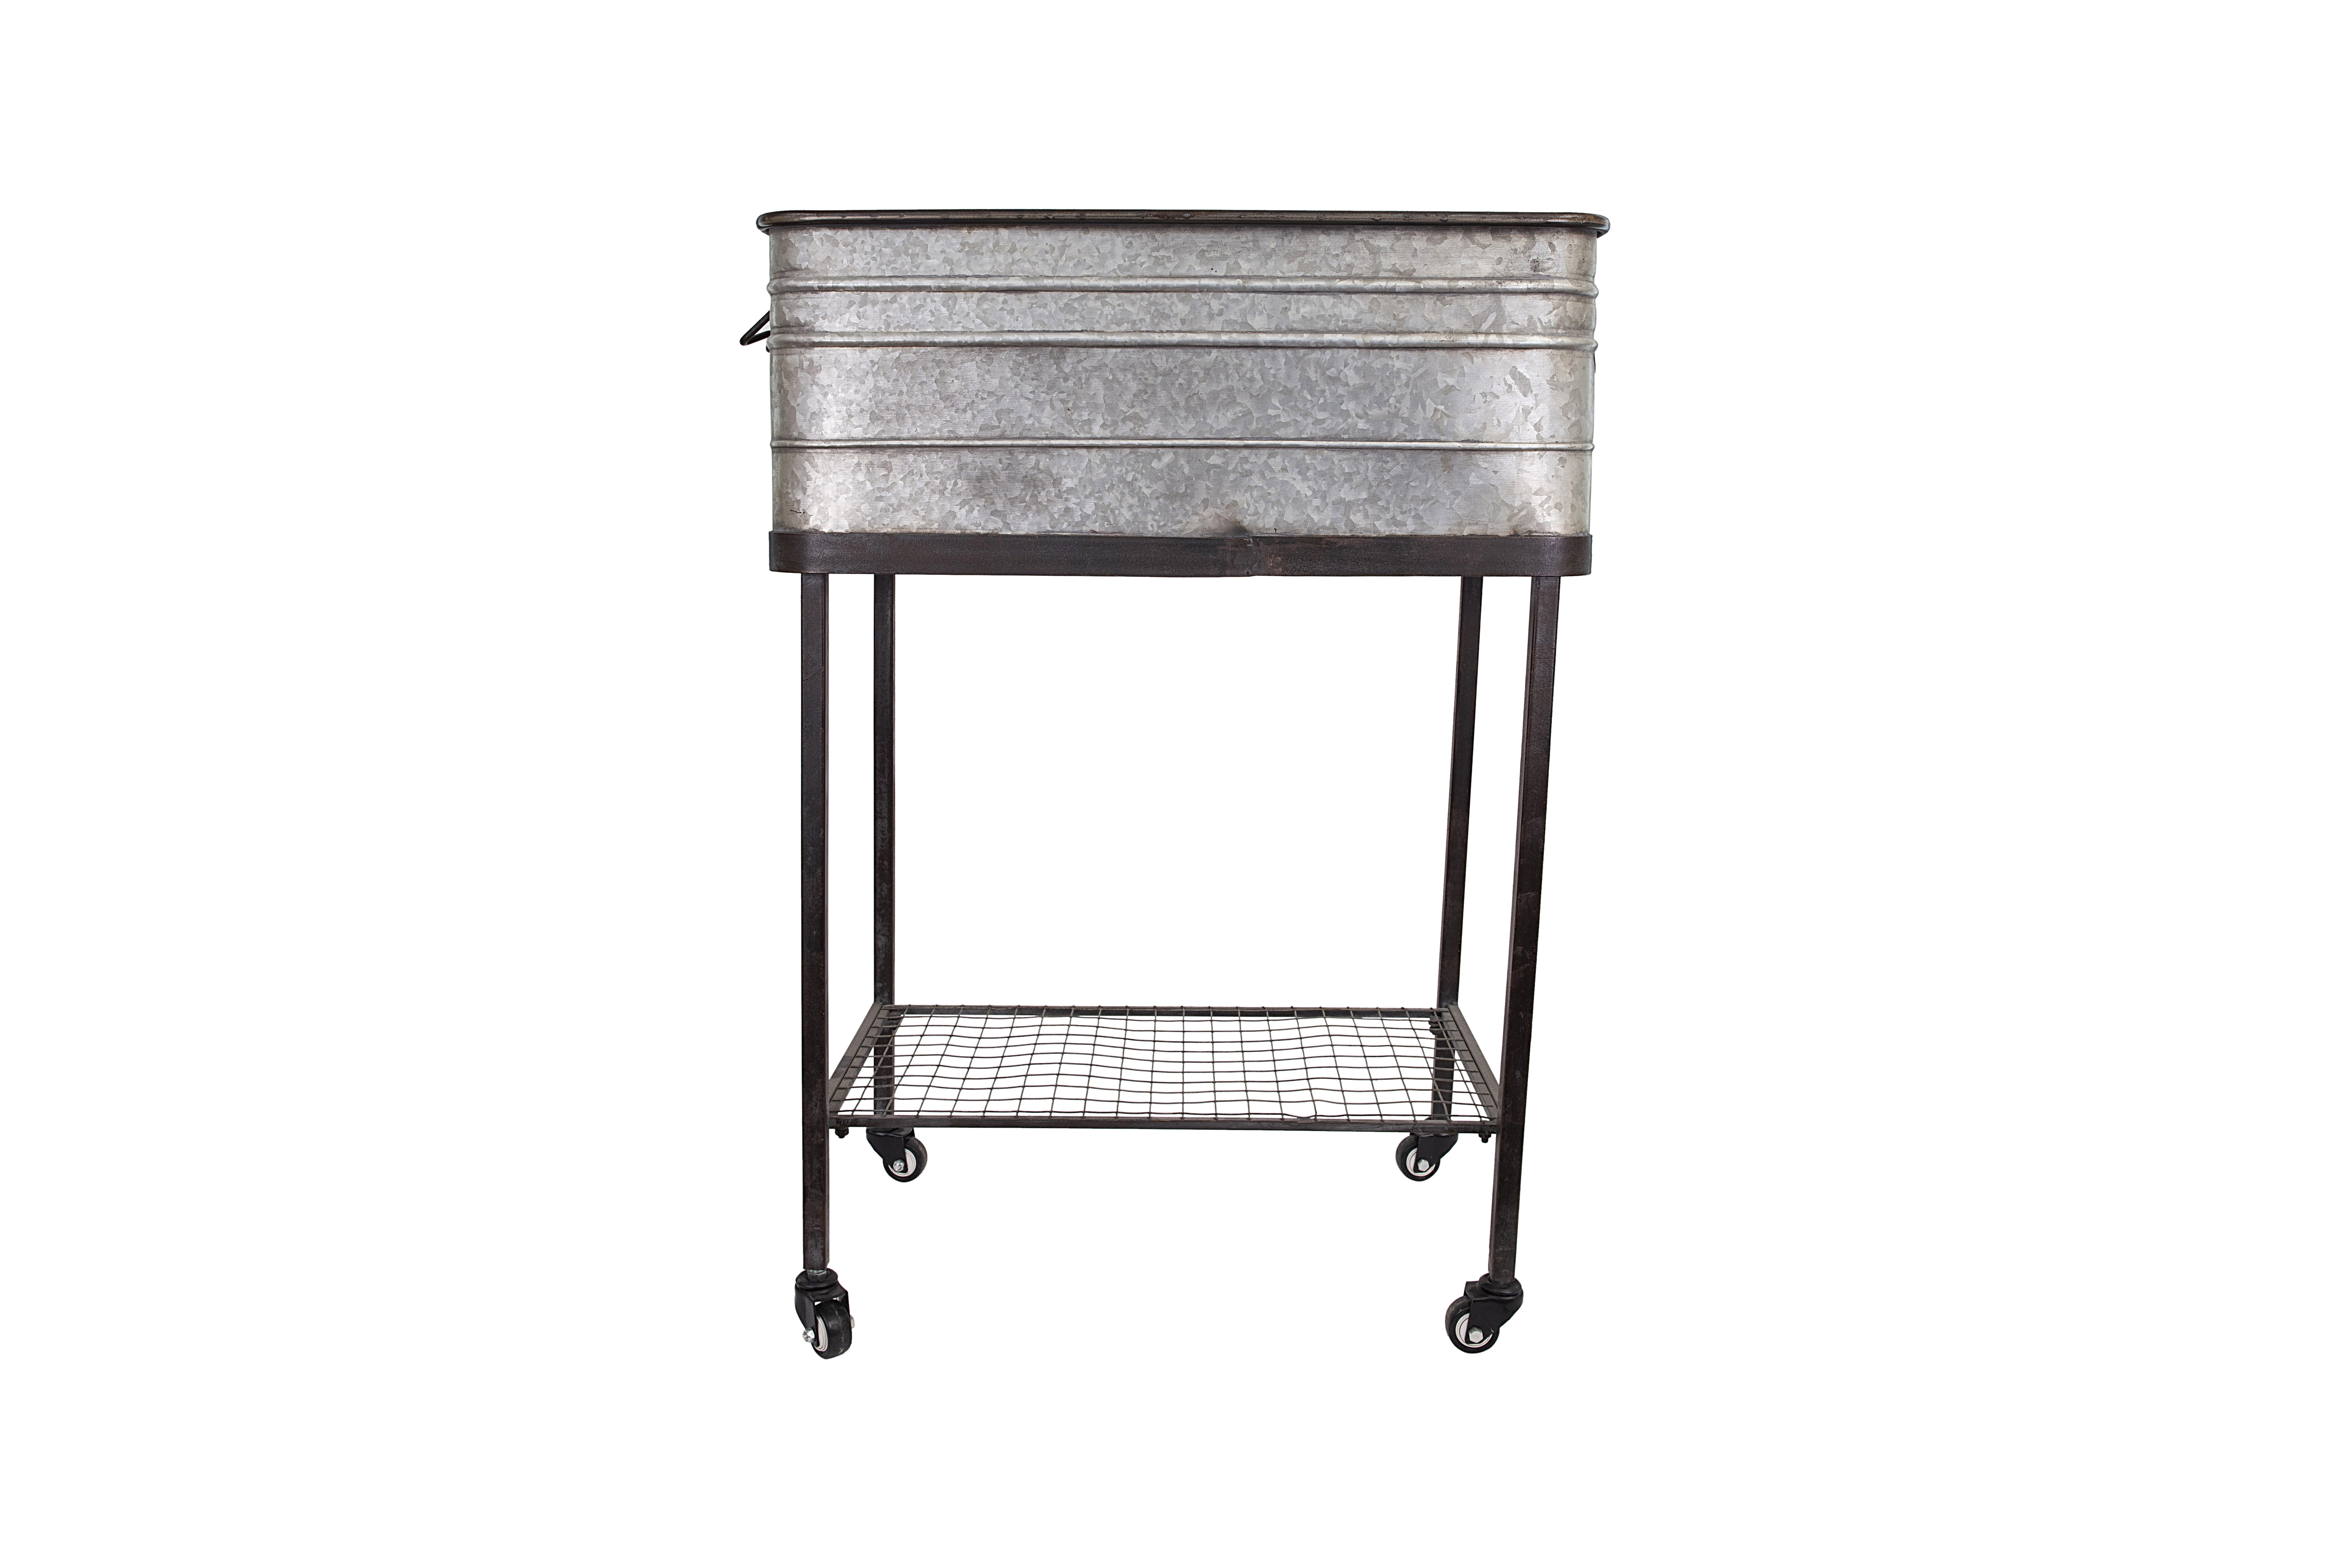 Metal Bucket/Planter on Stand with Casters - Nomad Home